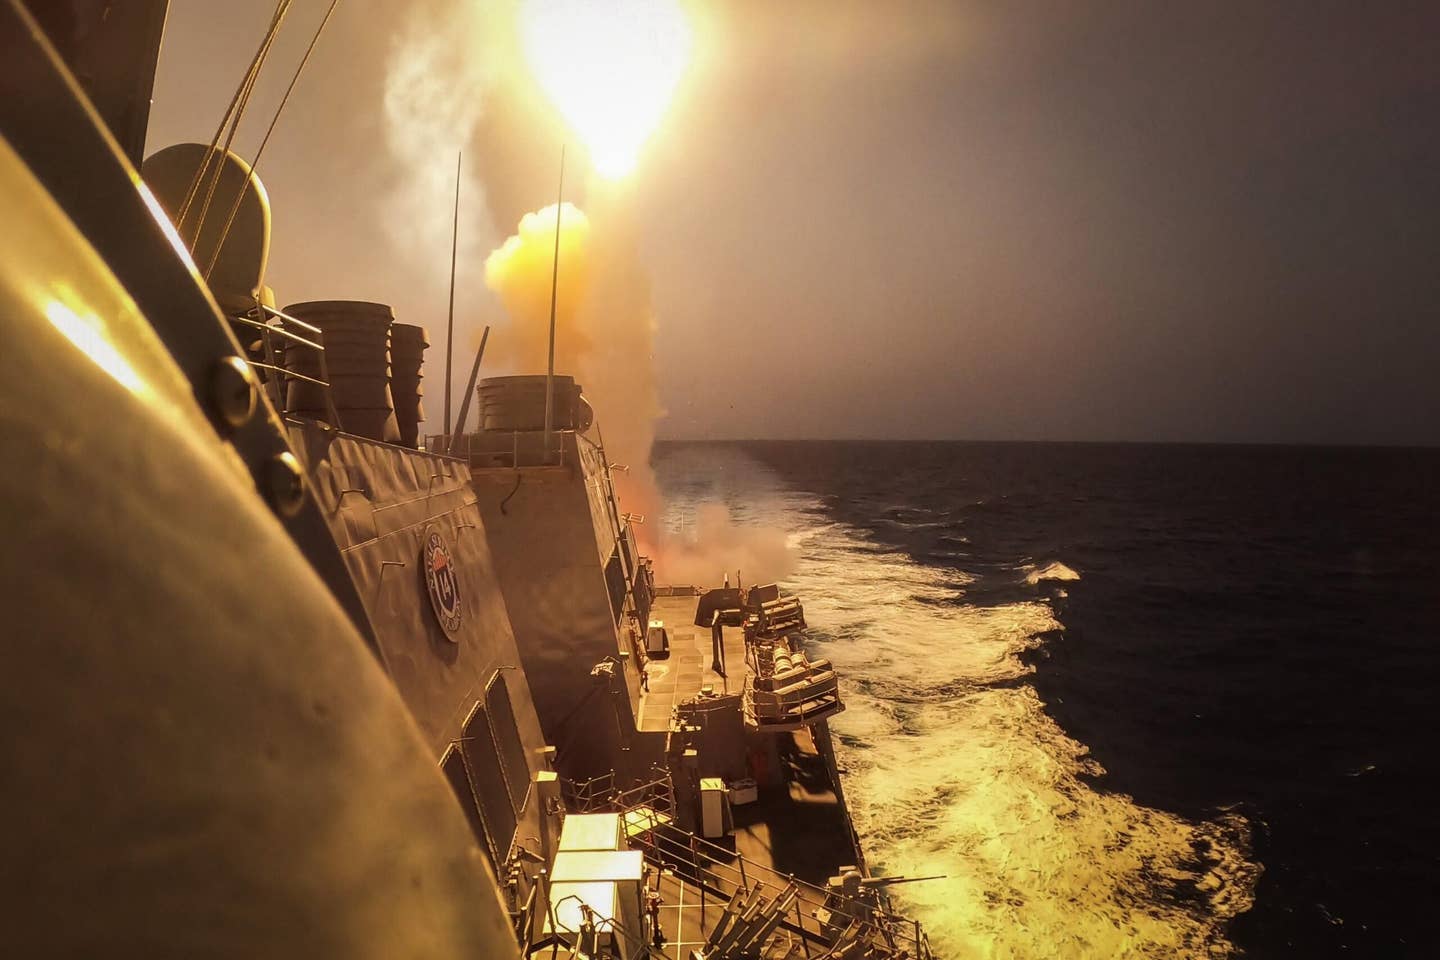 The <em>Arleigh Burke</em>-class guided-missile destroyer <em>USS Carney</em> (DDG 64) defeats a combination of Houthi missiles and unmanned aerial vehicles in the Red Sea, Oct. 19. (U.S. Navy photo by Mass Communication Specialist 2nd Class Aaron Lau)